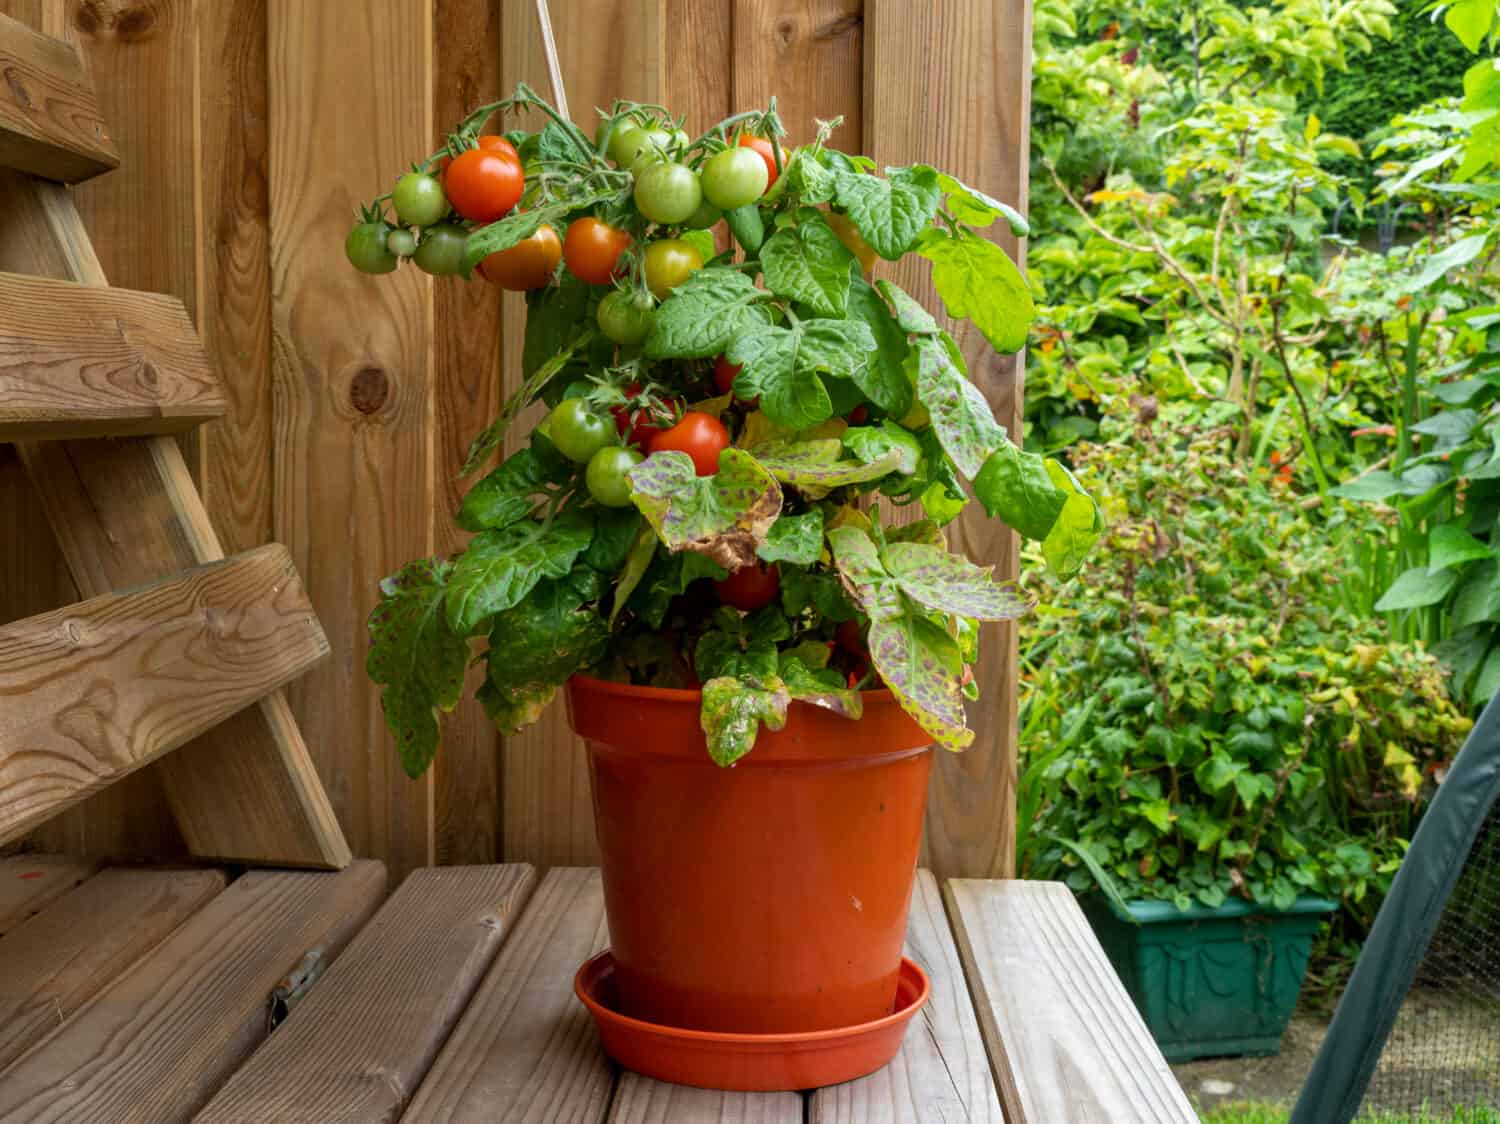 Dwarf tomato plant in a pot with ripe and unripe tomatoes, variety Red Robin